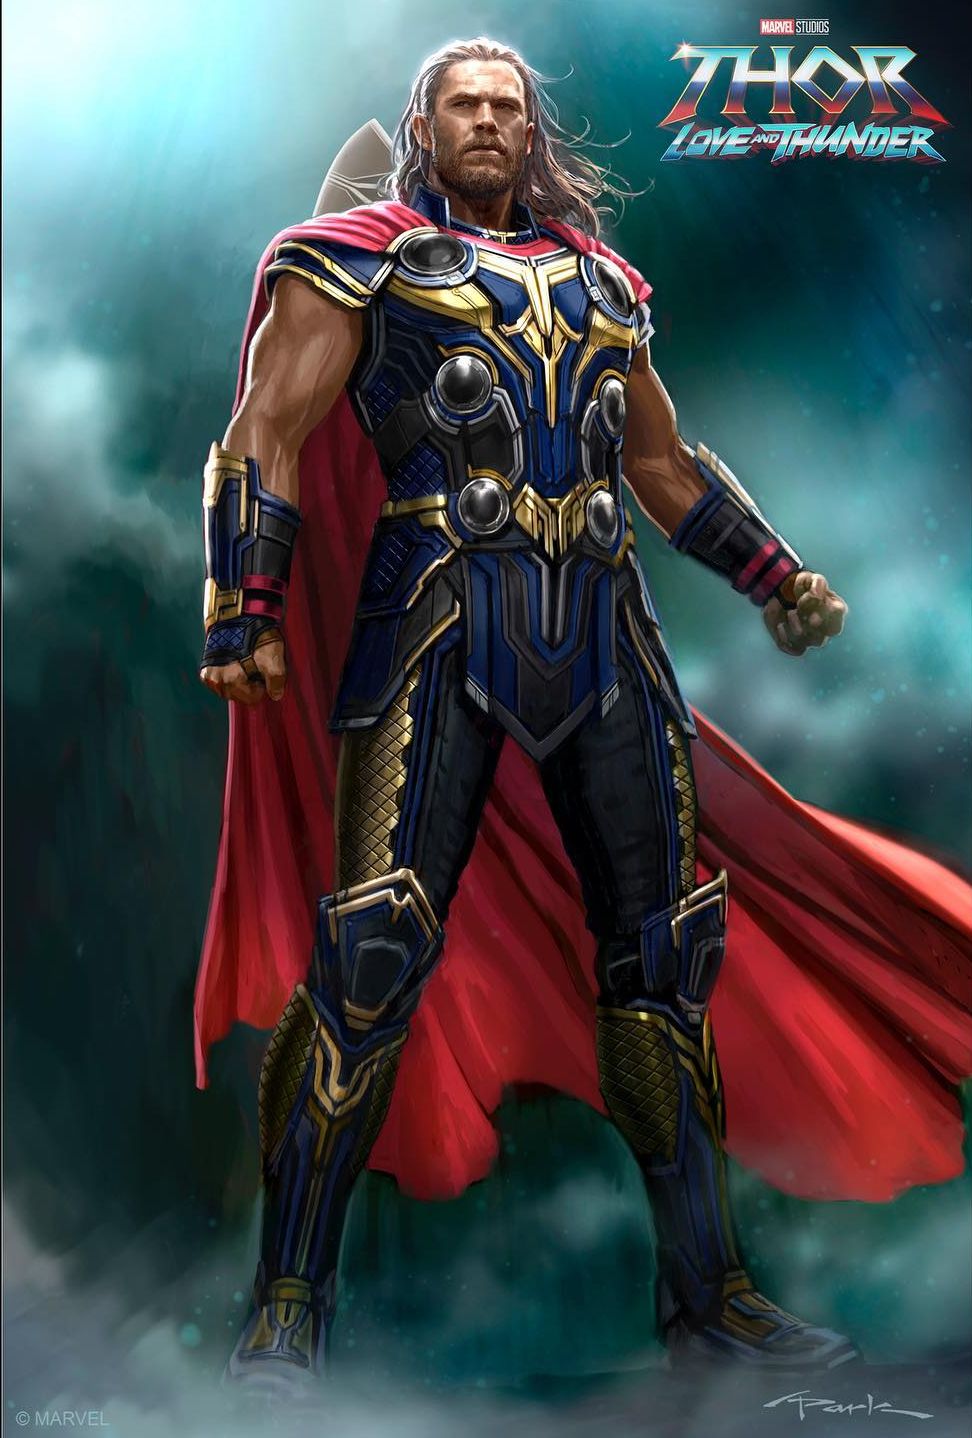 Another Alternate Gorr The God Butcher Design From THOR: LOVE AND